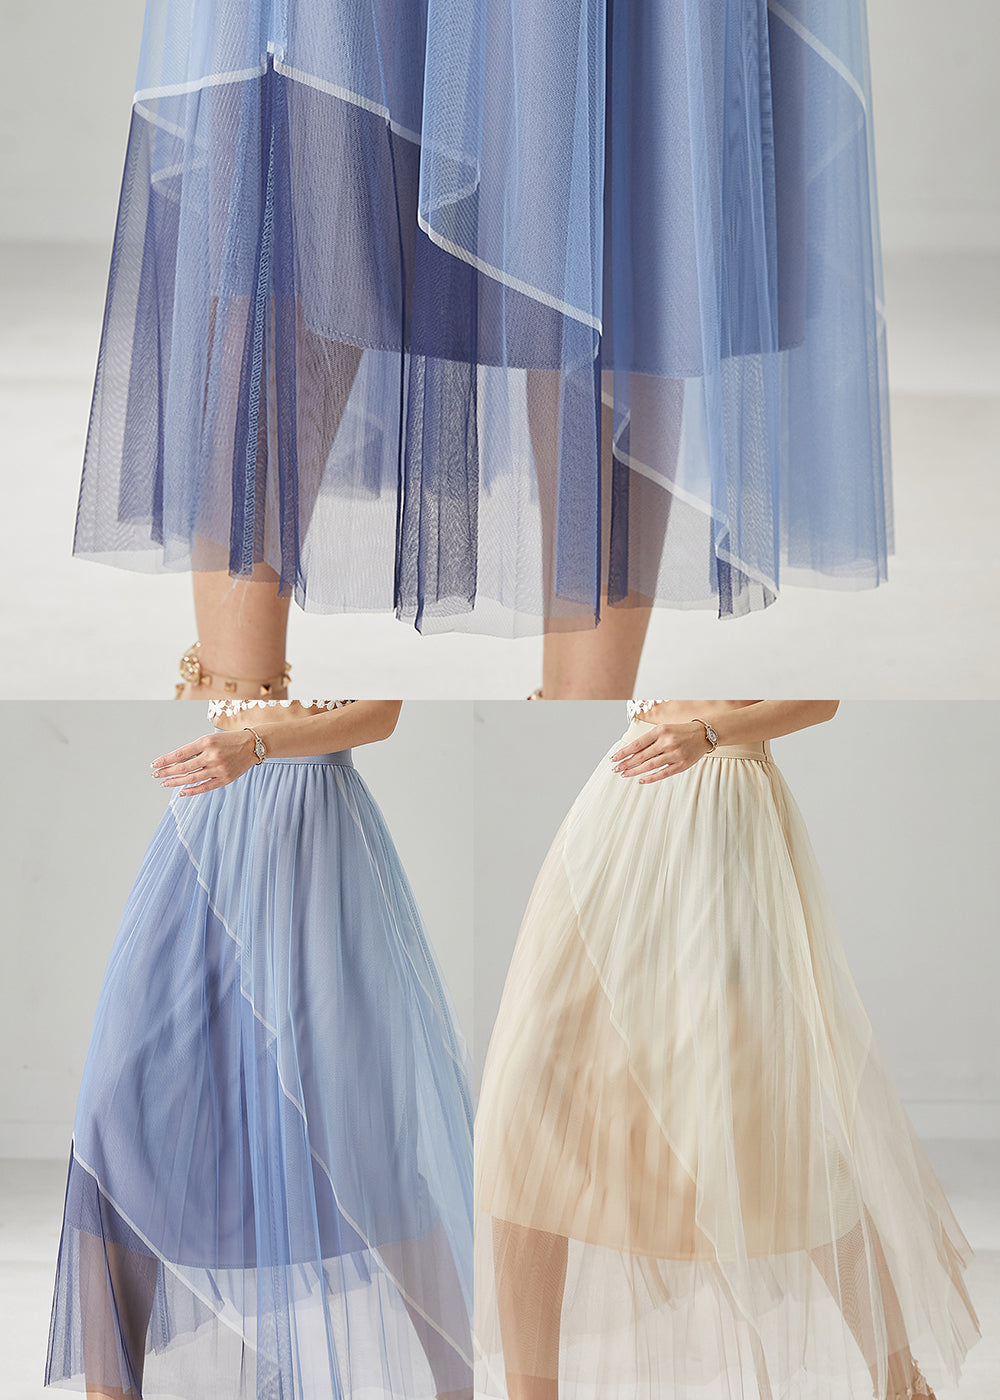 Beautiful Apricot High Waist Patchwork Tulle Skirts Summer